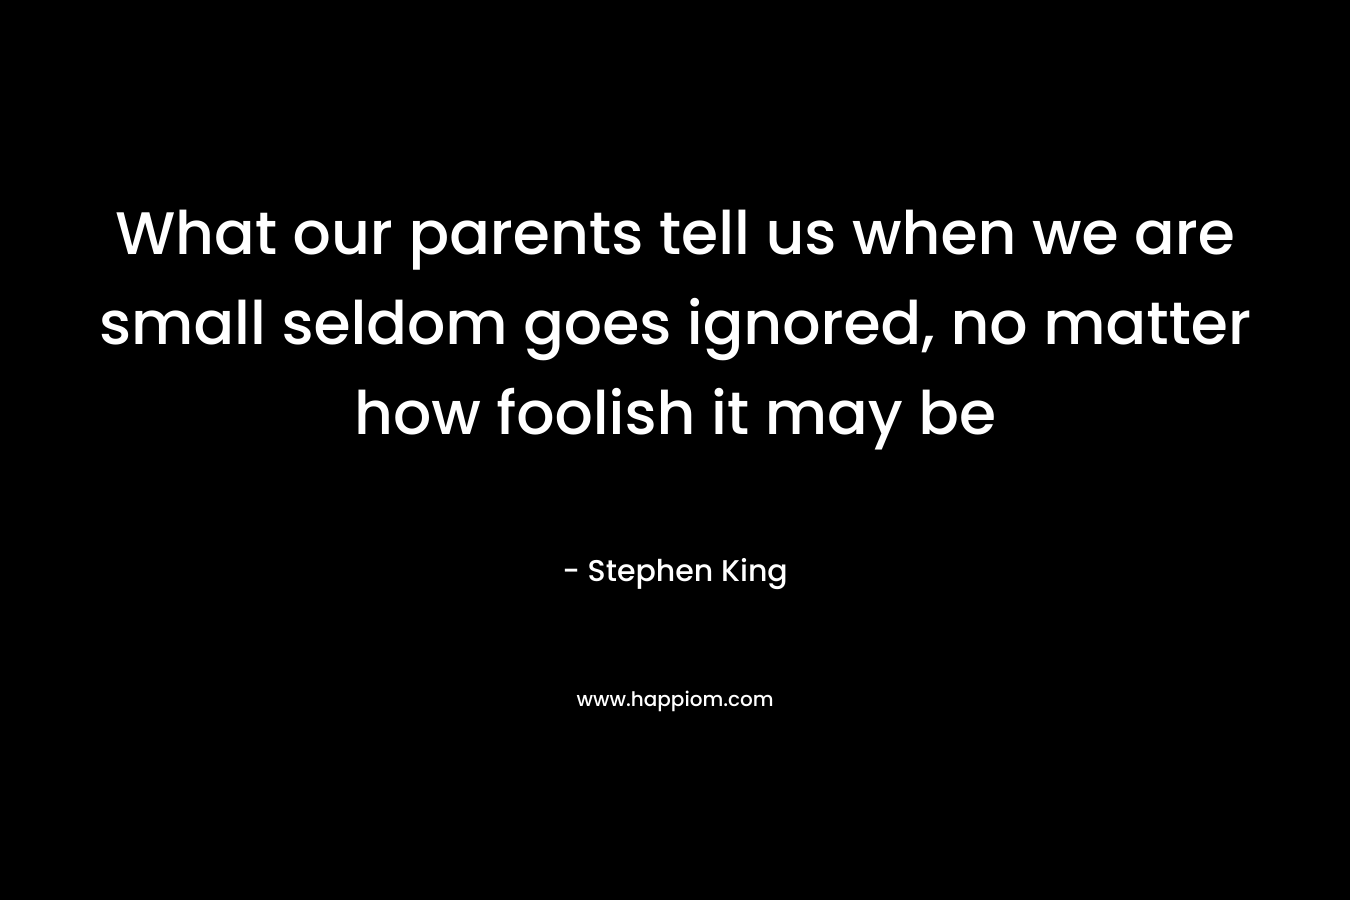 What our parents tell us when we are small seldom goes ignored, no matter how foolish it may be – Stephen King